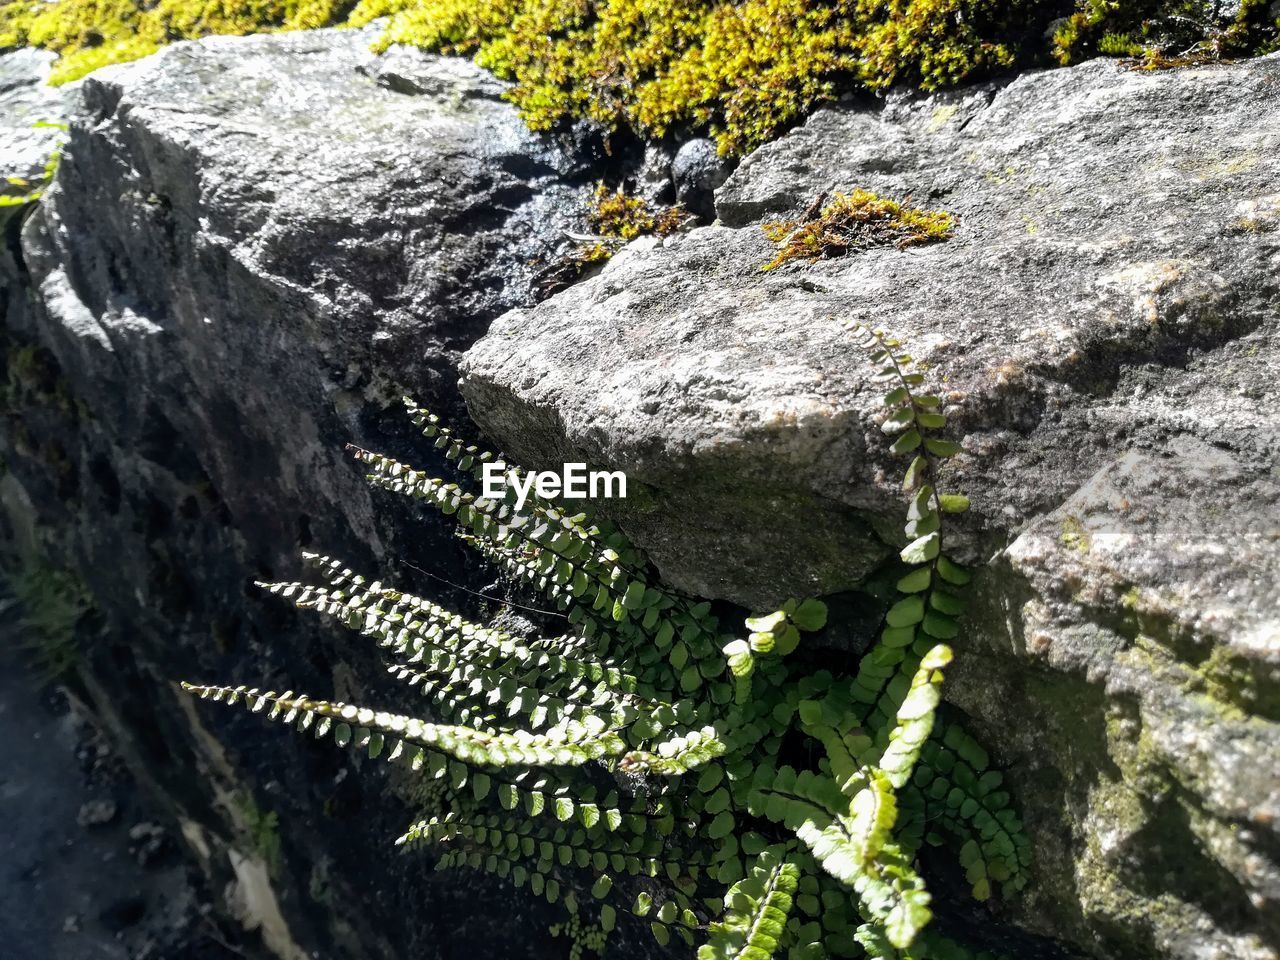 CLOSE-UP OF PLANTS GROWING ON ROCKS